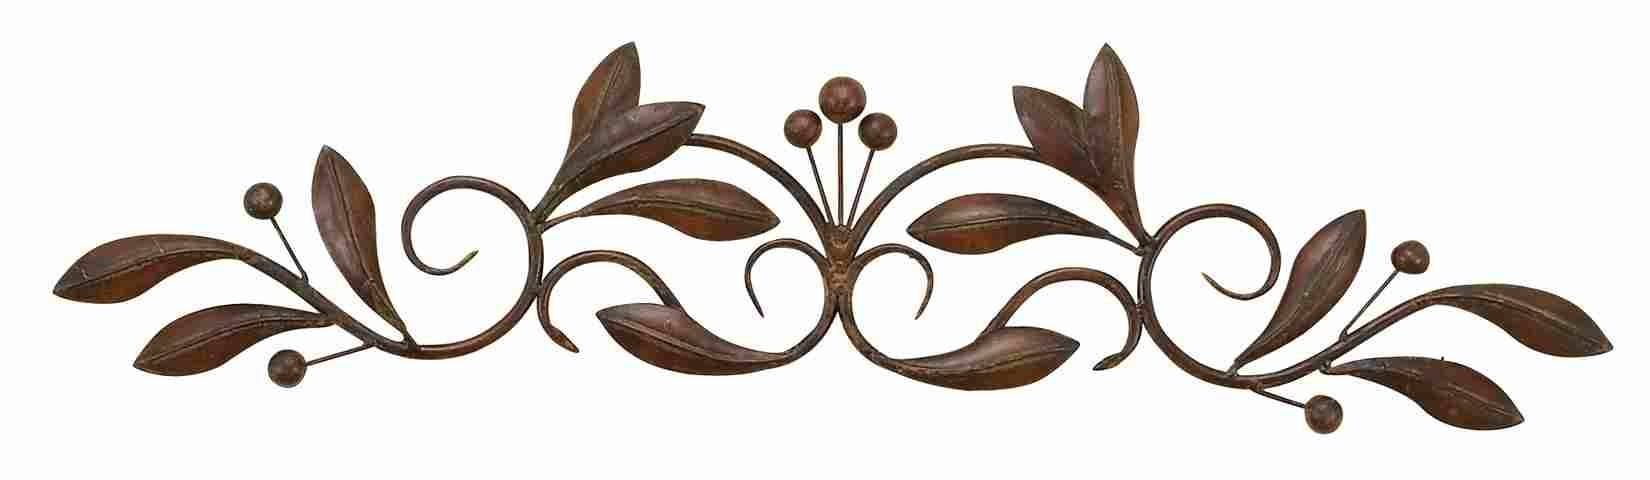 Small Buds & Vines – Metal Wall Art Scroll In Most Up To Date Small Metal Wall Art (Gallery 1 of 20)